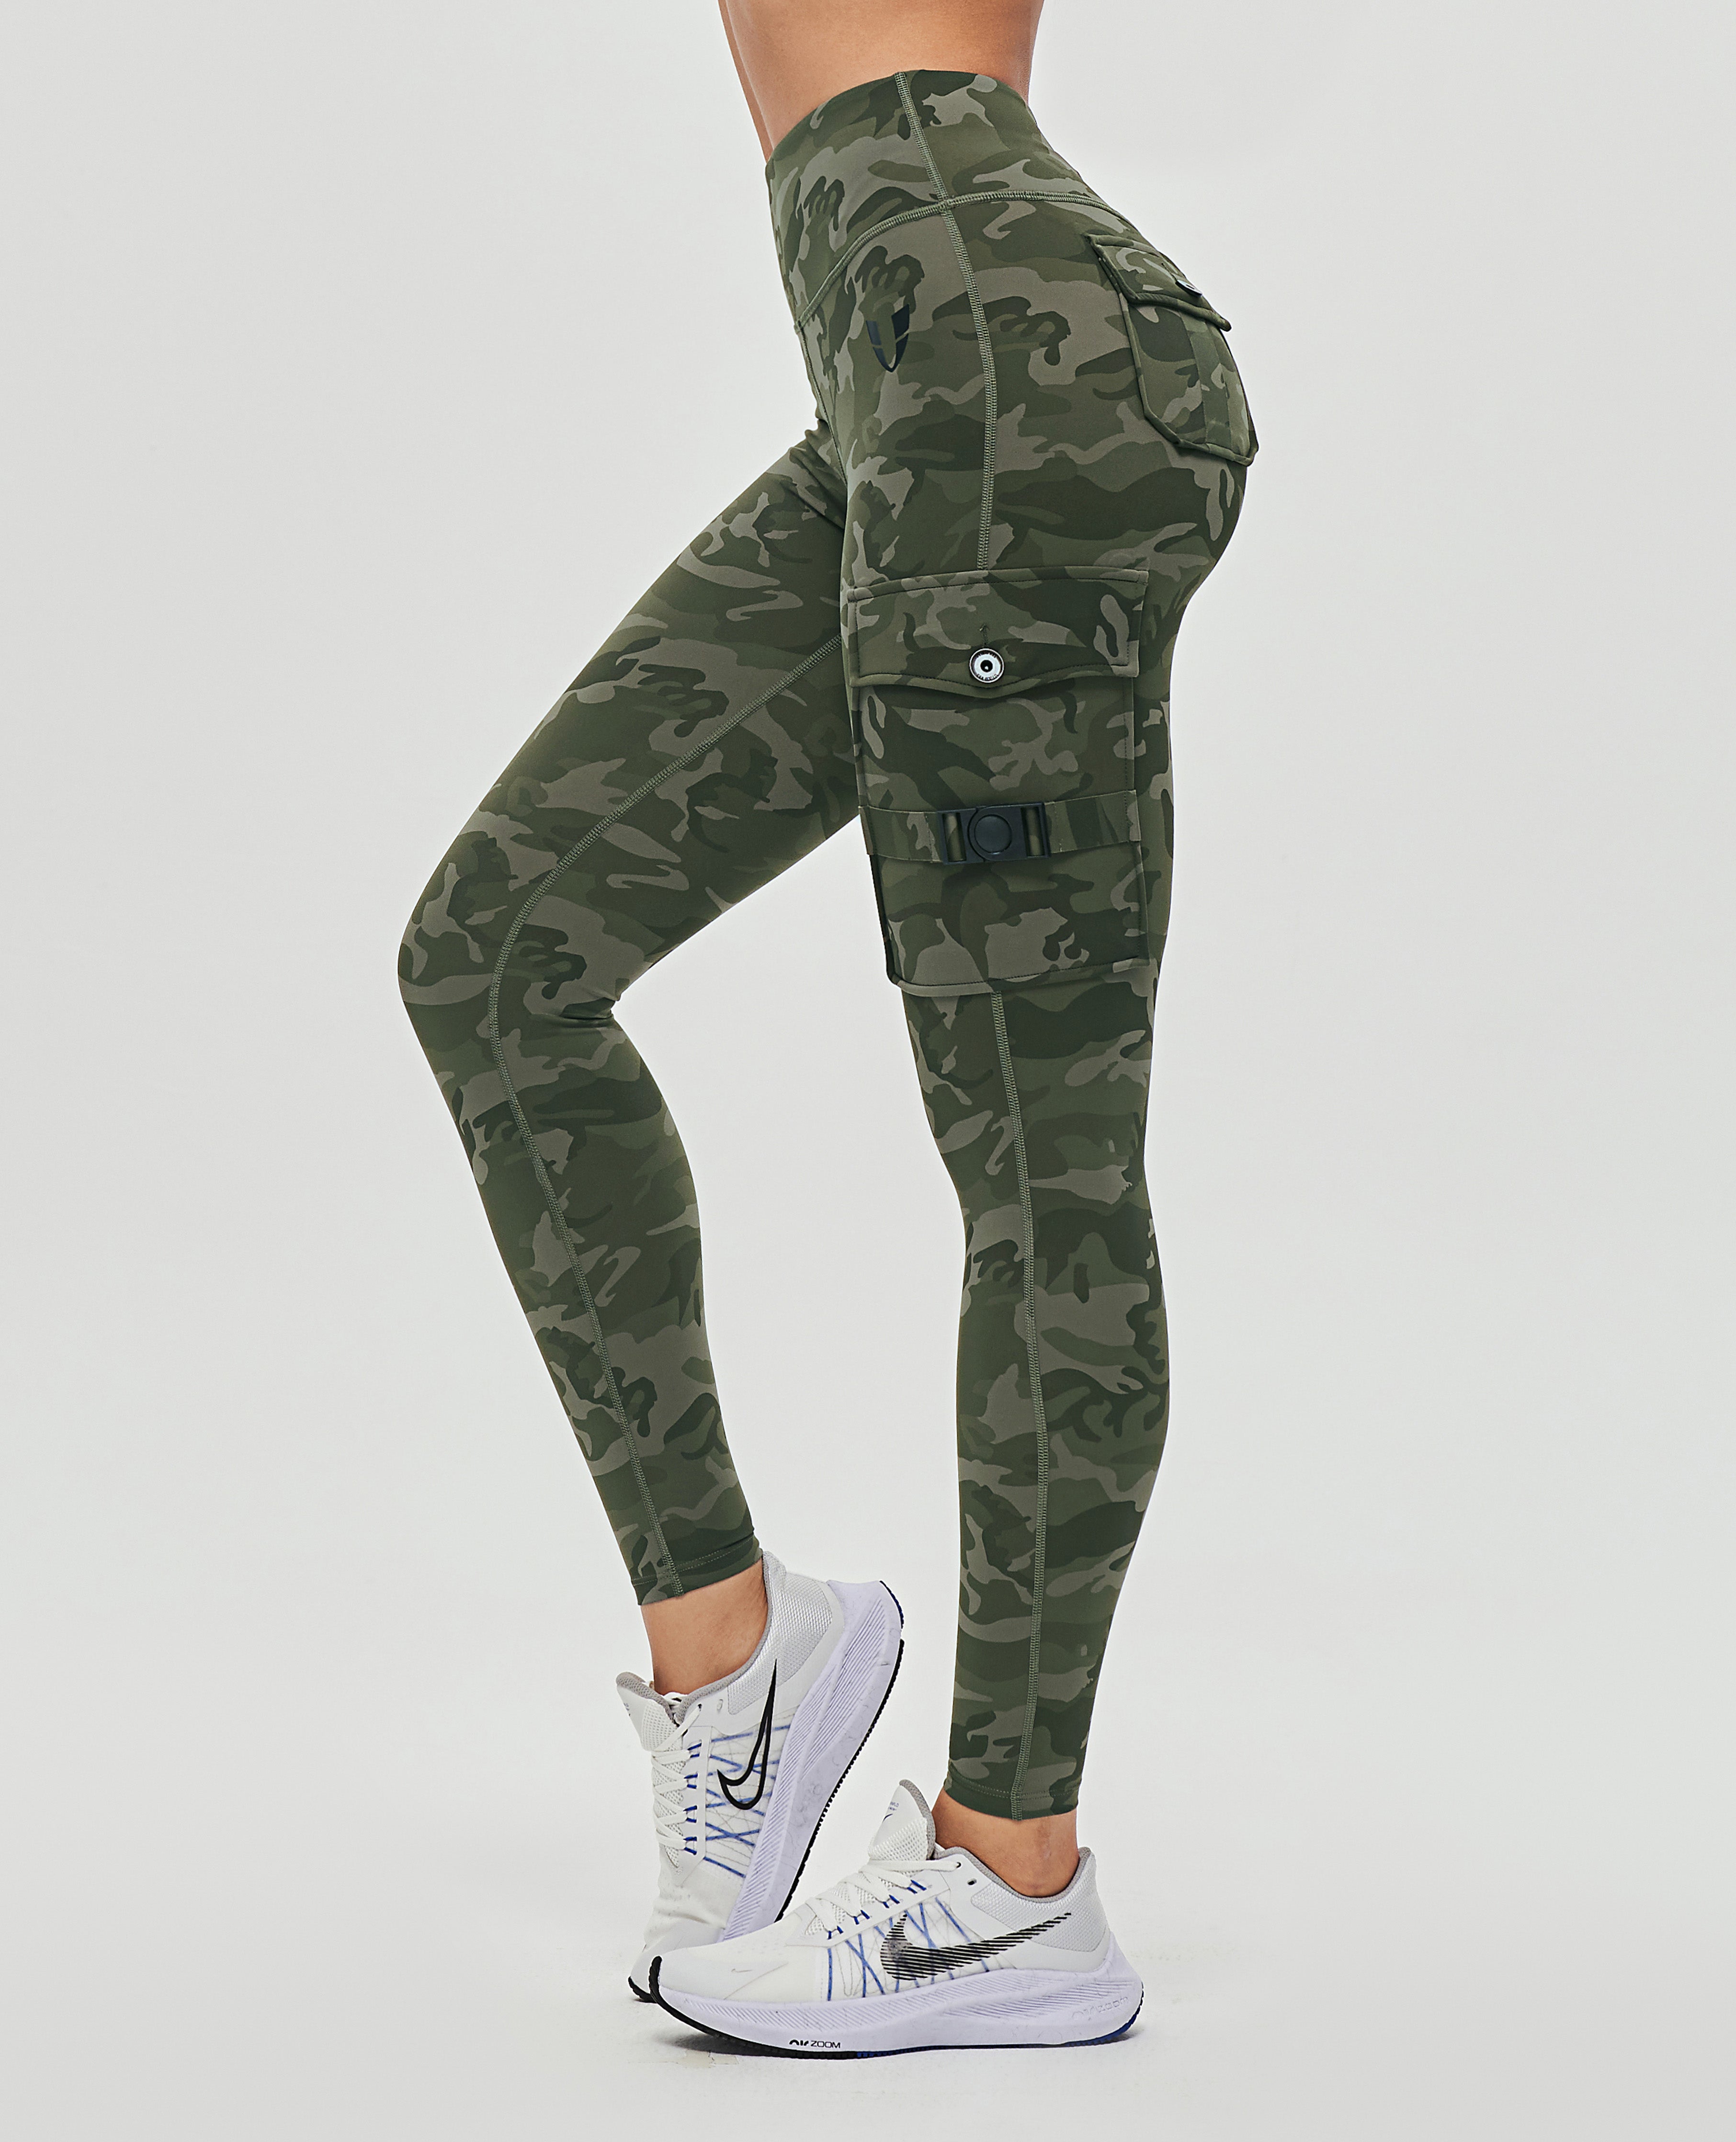 Buy Camouflage 7/8 Length Leggings/Tights Online | Fairy Pole Mother